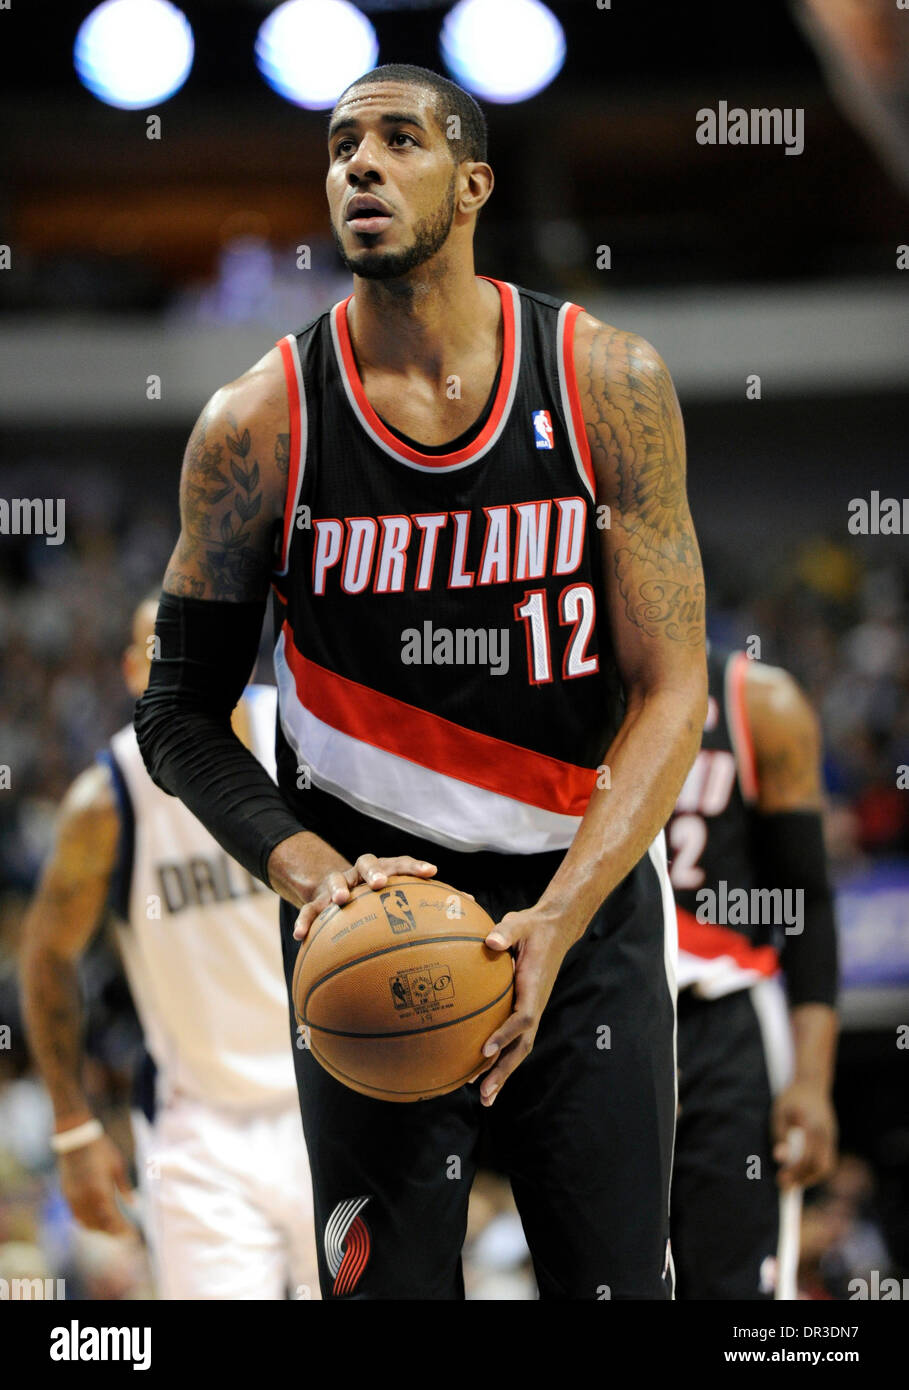 Jan 18, 2014: Portland Trail Blazers power forward LaMarcus Aldridge #12  scored 30 points during an NBA game between the Portland Trail Blazers and  the Dallas Mavericks at the American Airlines Center